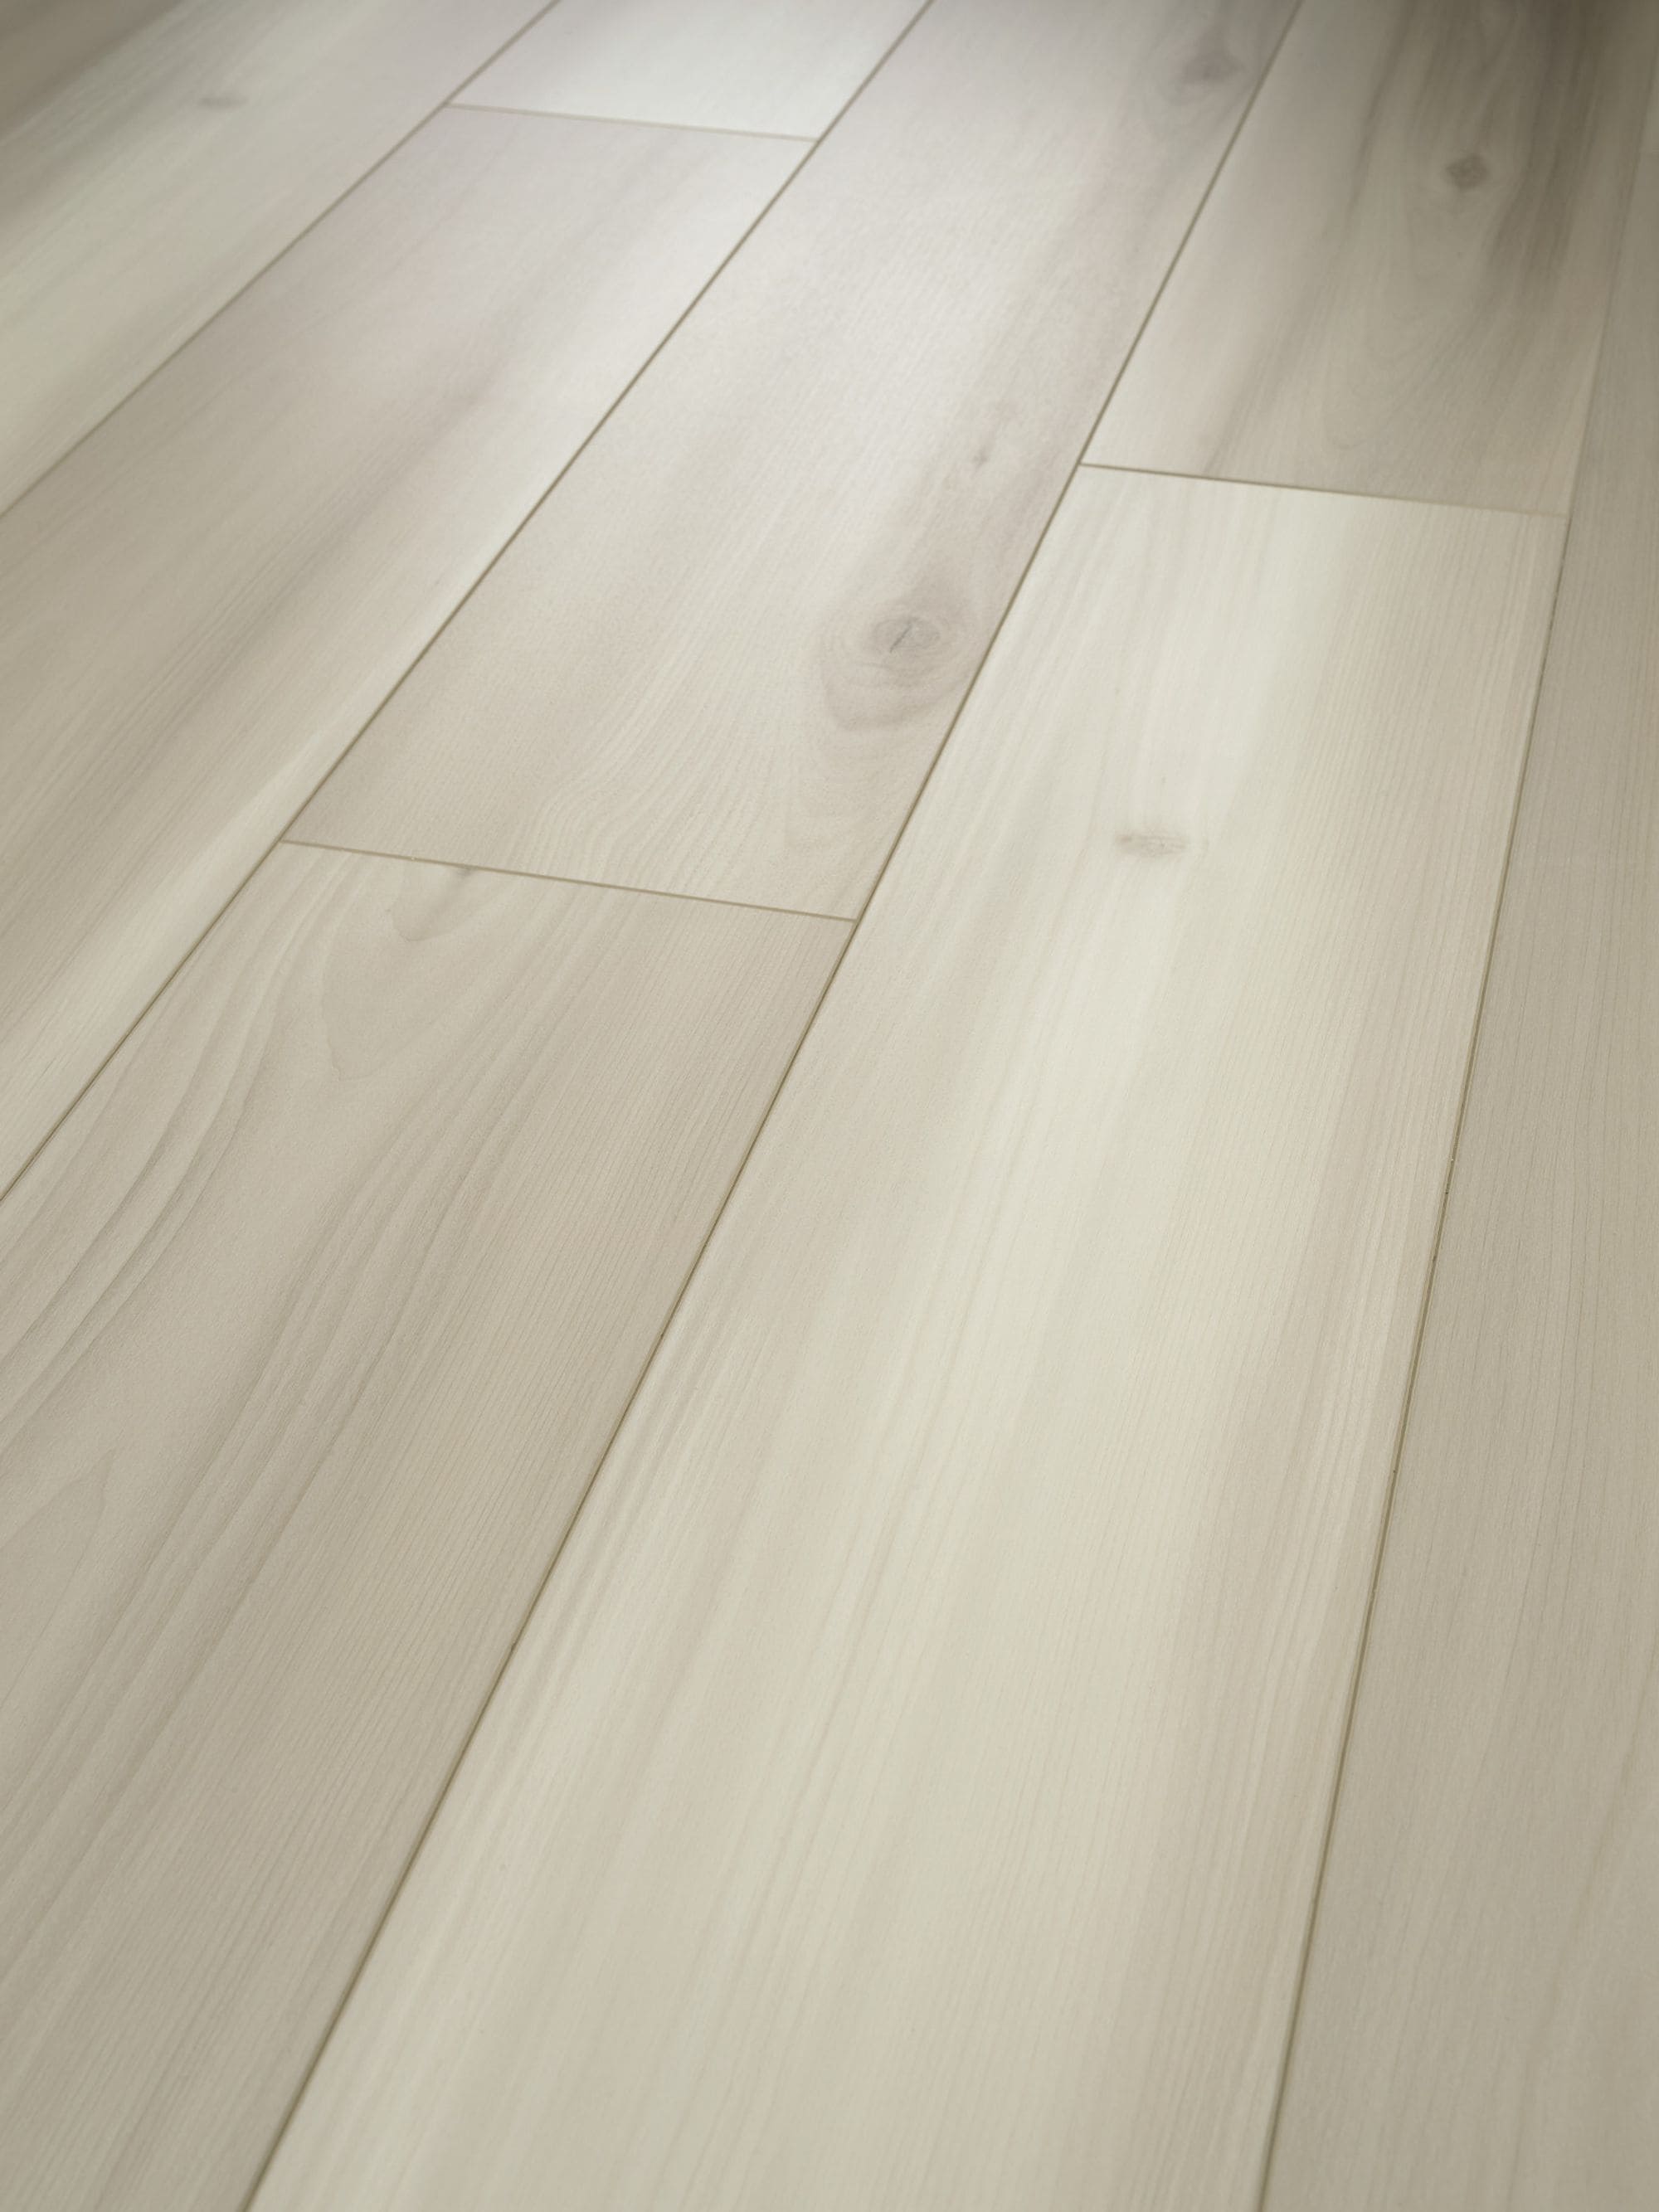 4mm Thickness Commercial White Oak Lvt Vinyl Wood Plank Elevator Flooring -  China Lvp on Stairs, Vinly Flooring